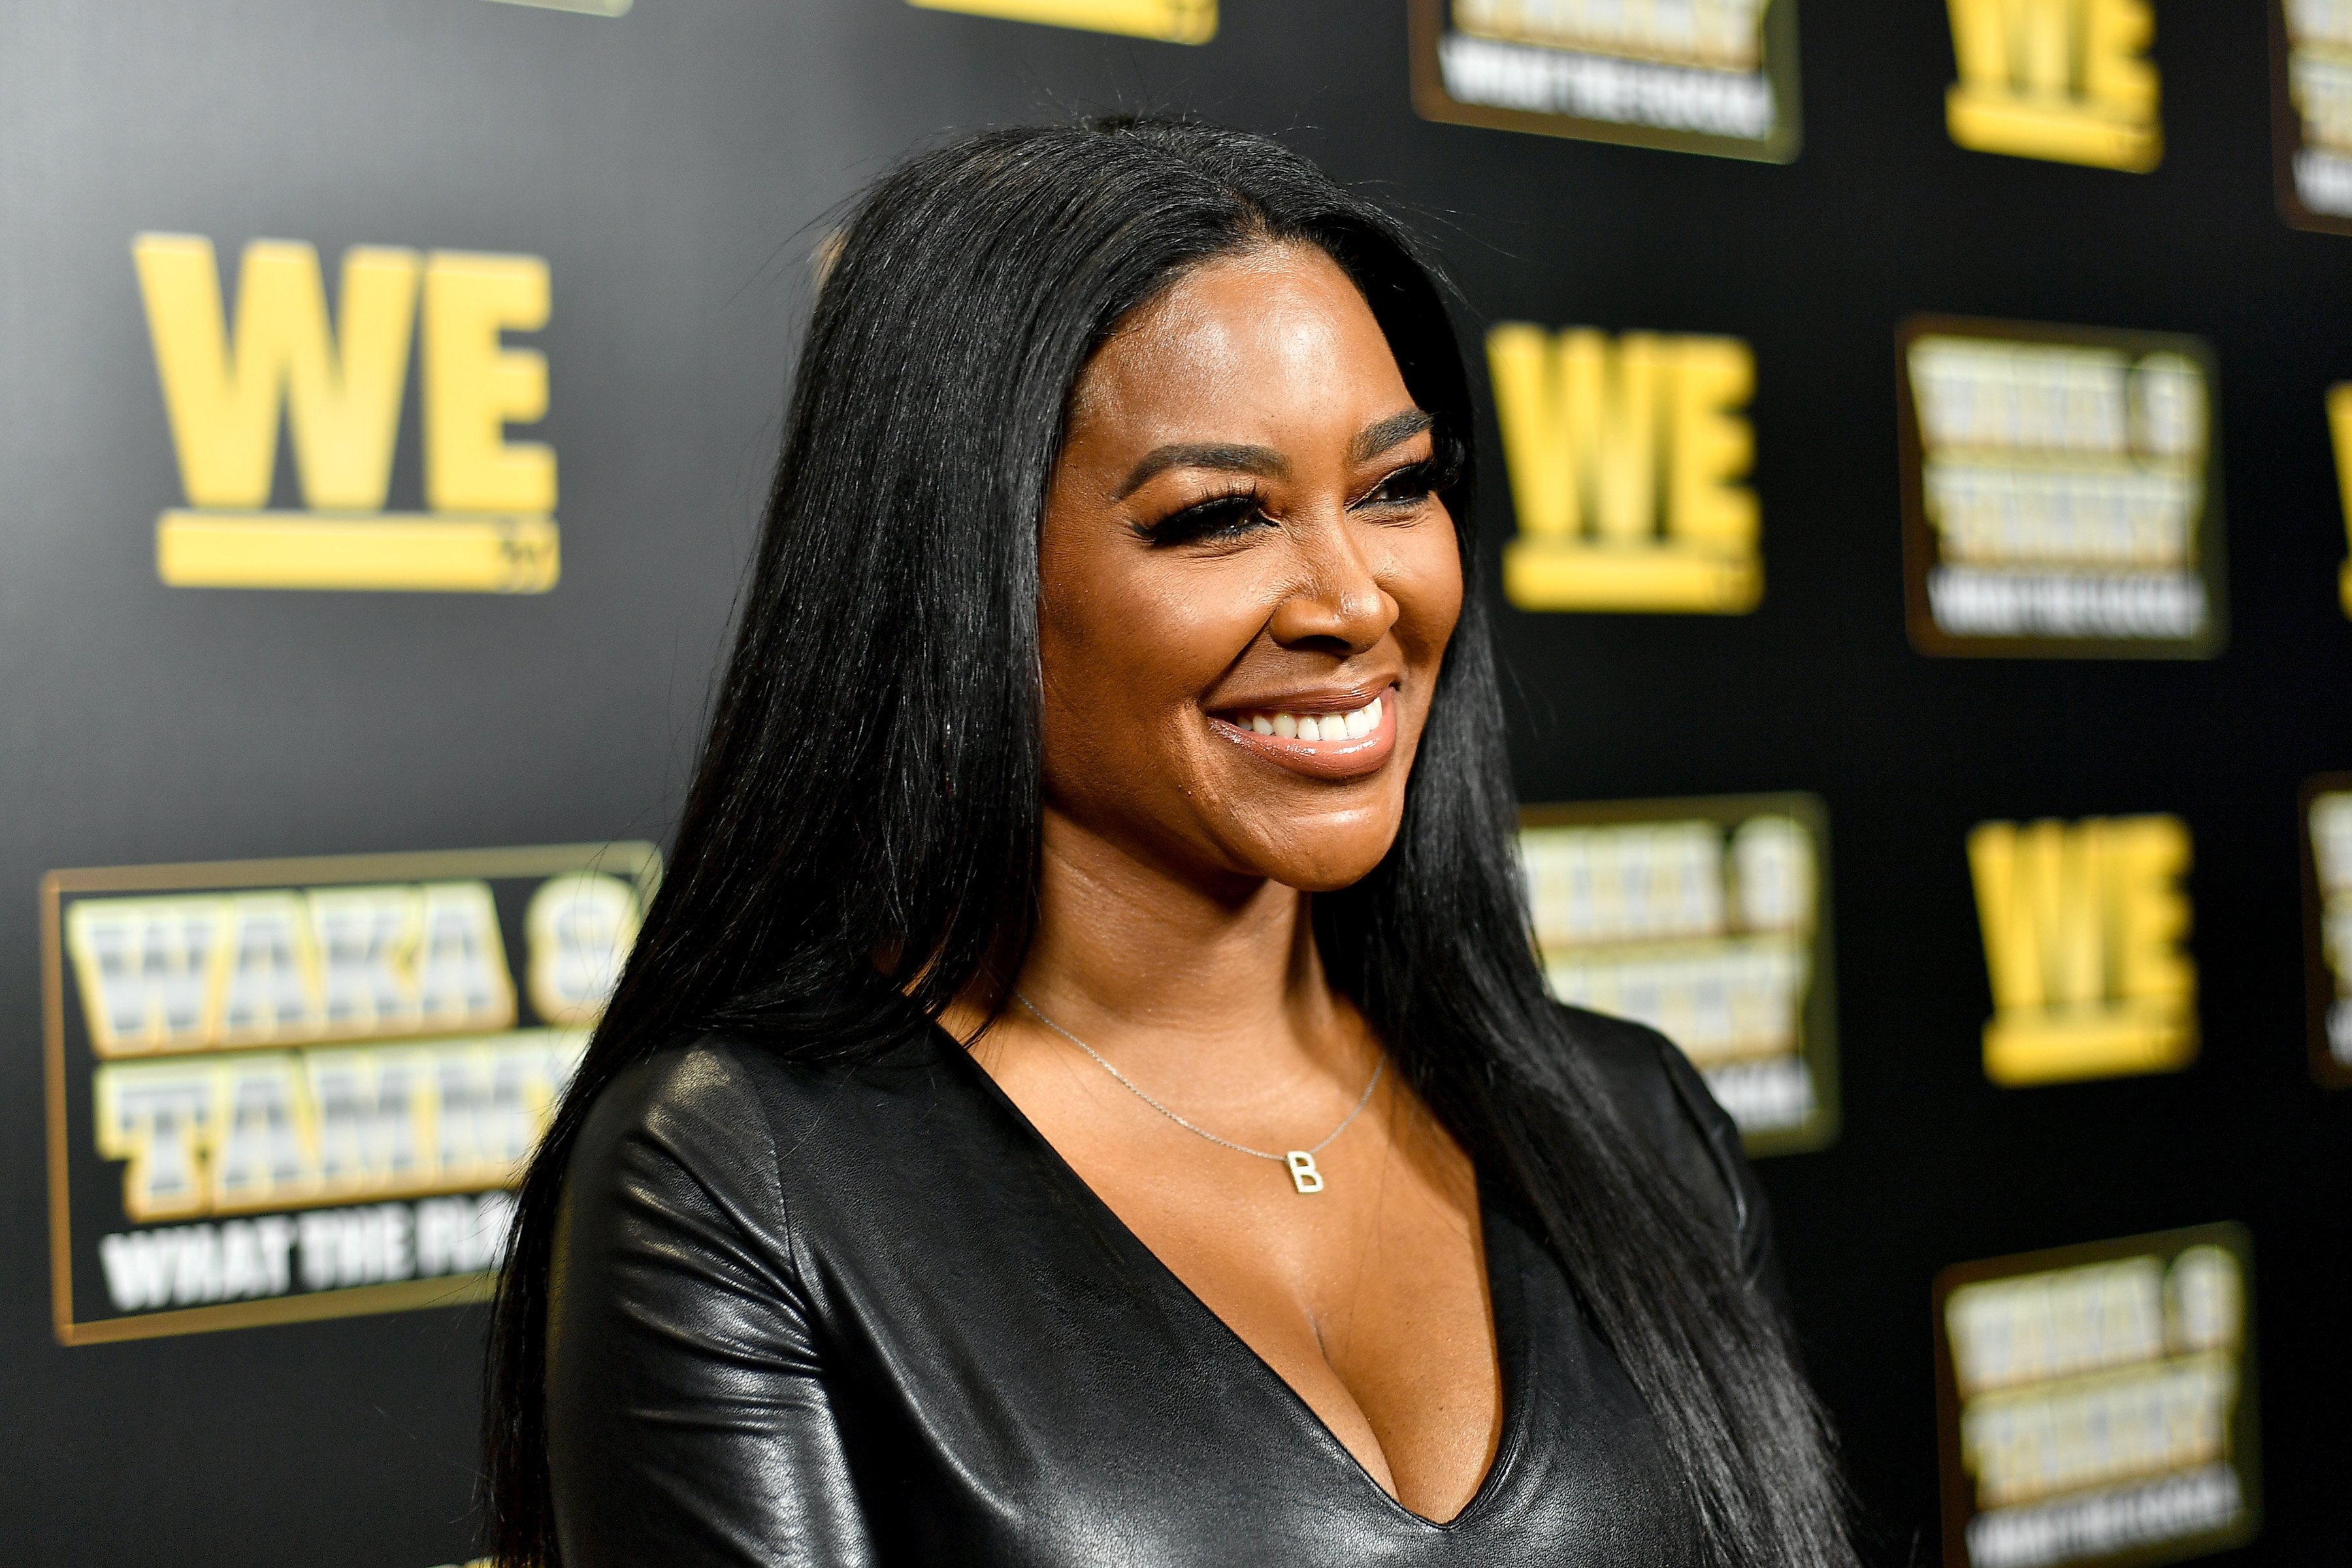 Kenya Moore at the premiere of "Waka & Tammy: What The Flocka" in Atlanta, Georgia, 2020 | Source: Getty Images